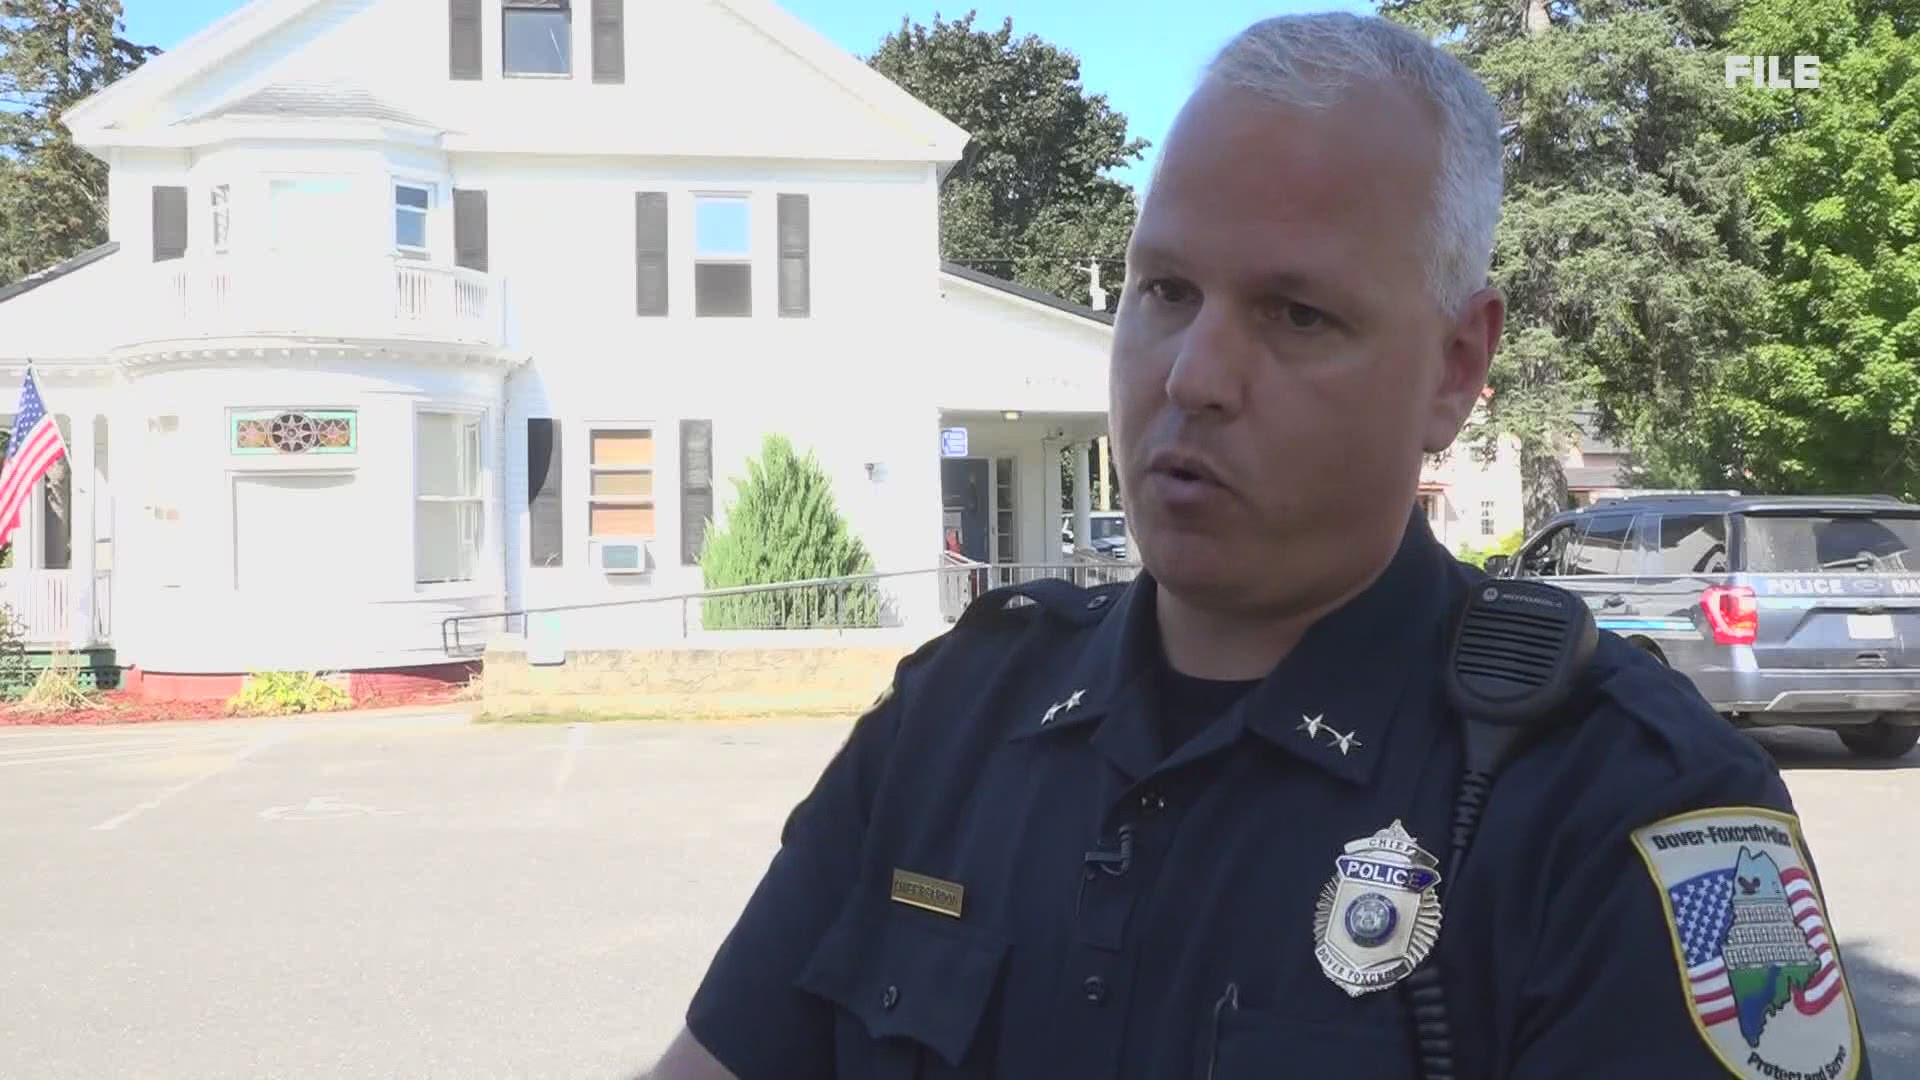 Dover-Foxcroft Chief of Police arrested; facing criminal charges